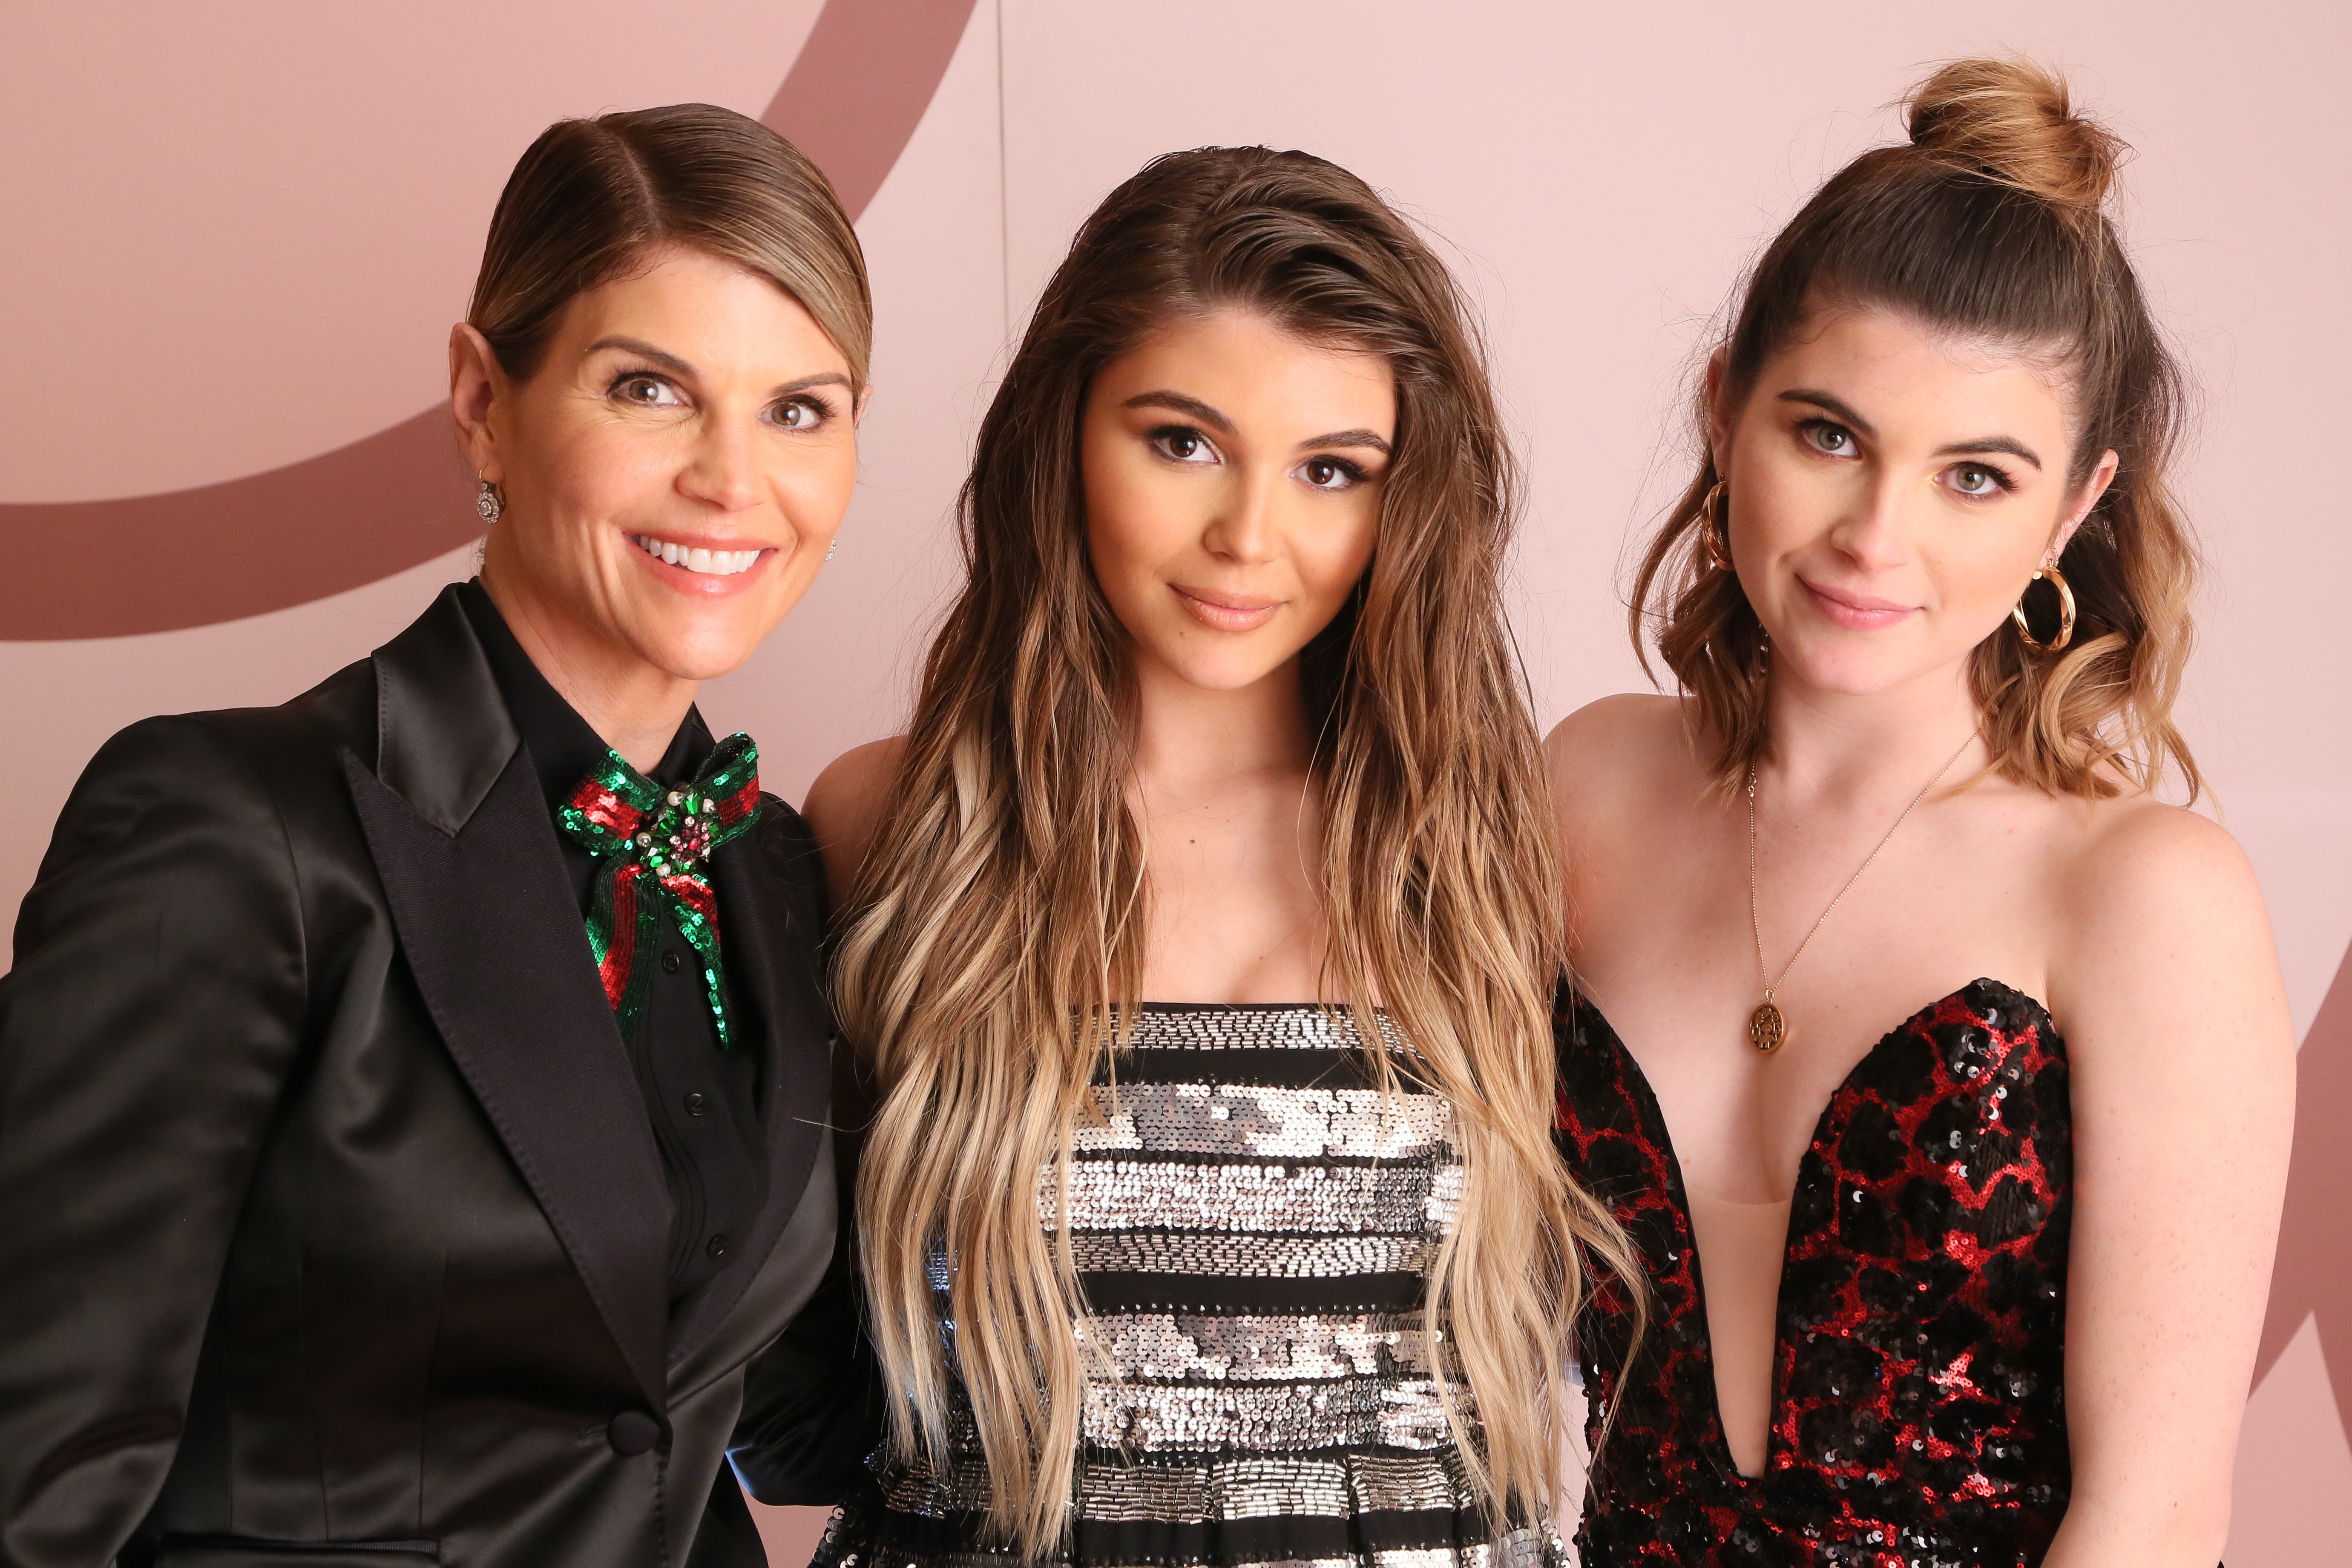 Lori Loughlin, Olivia Jade and Isabella Rose Giannulli at the Olivia Jade X Sephora Collection Palette Collaboration Launching on December 14, 2018 | Photo: GettyImages